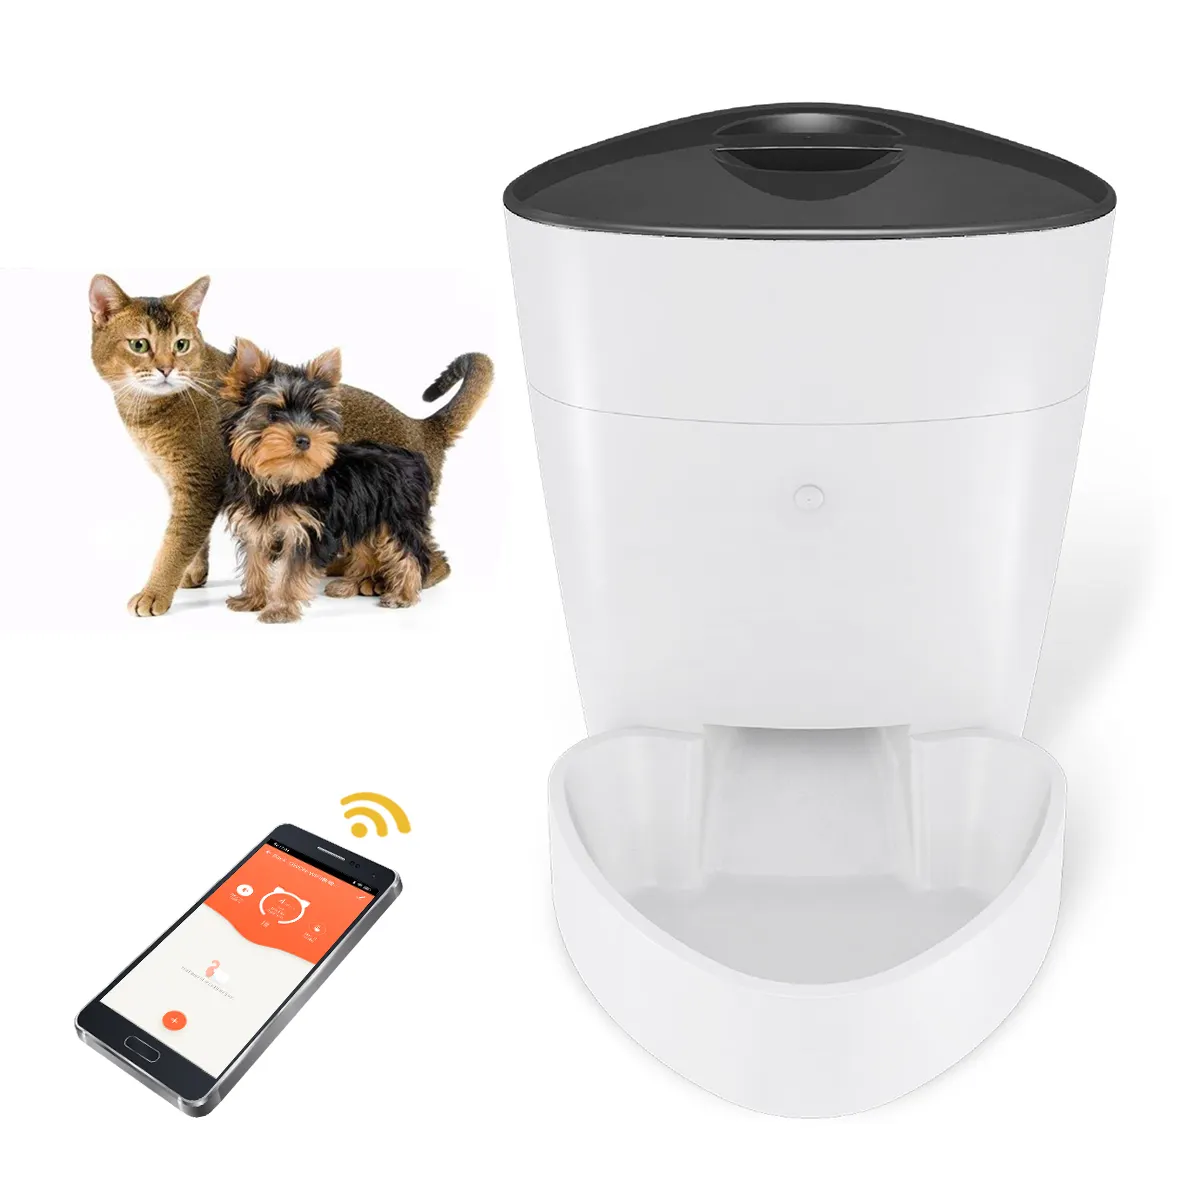 Automatic Cat wifi pet feeder   Smart Feed Pet Feeder for Small Animals Auto Pet Food Dispense